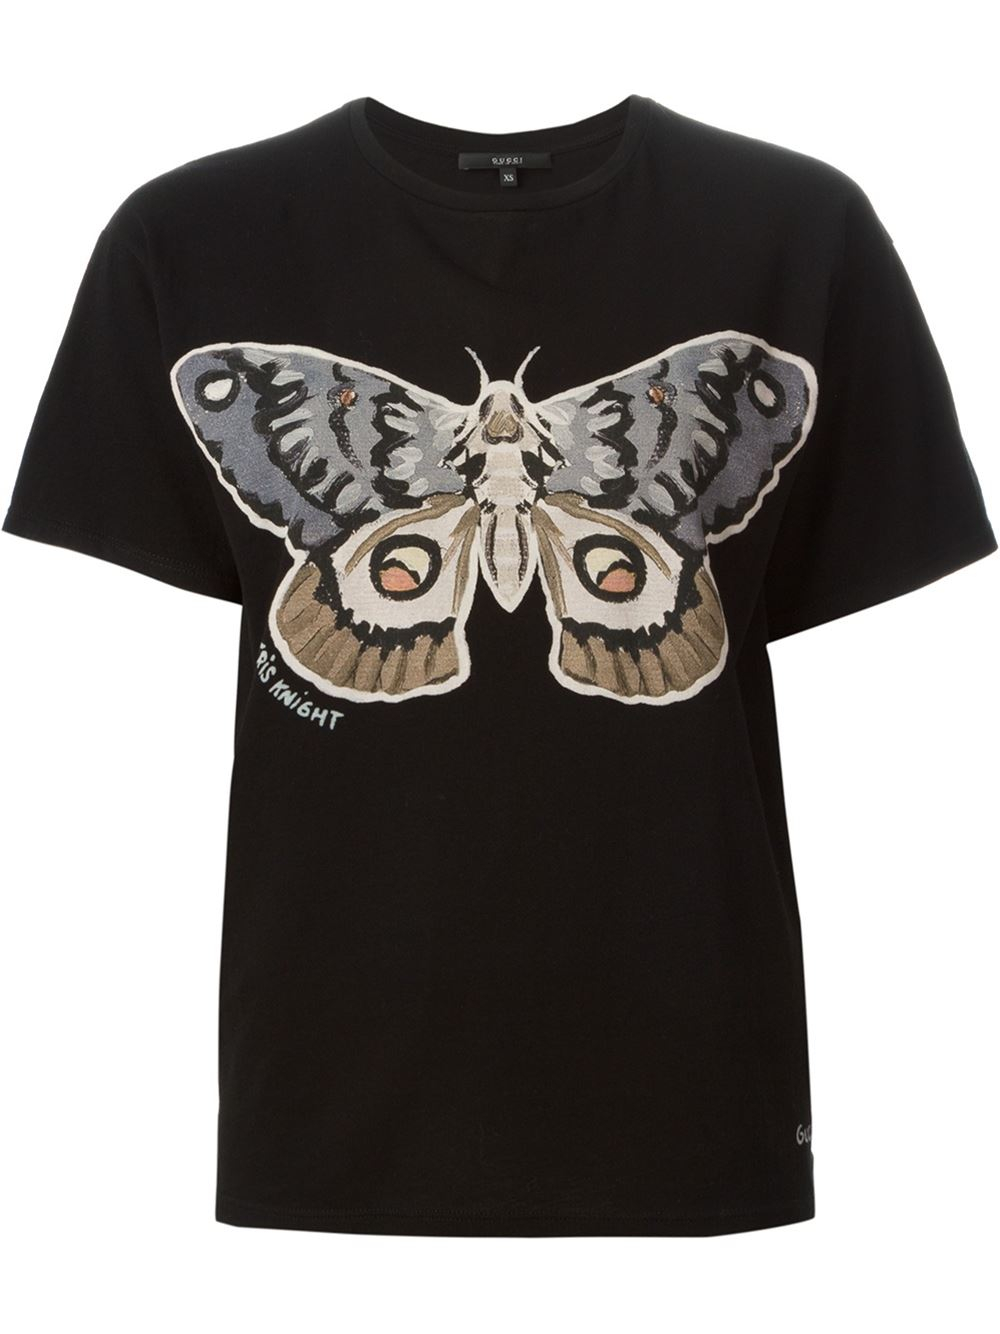 Gucci Butterfly T-shirt – The Pointe Boutique